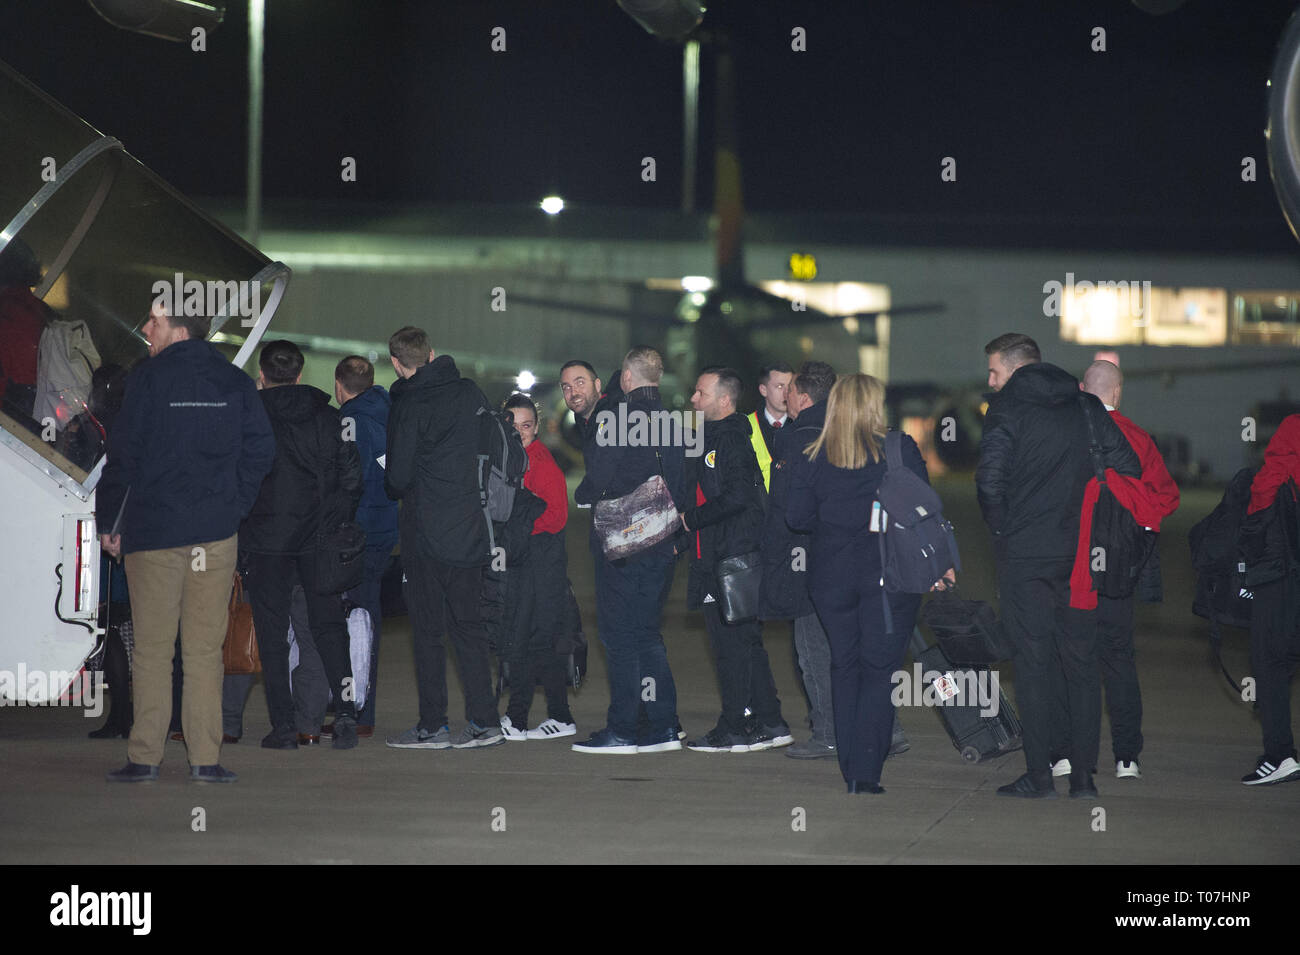 Glasgow, UK. 18 March 2019. Scottish Defender, Callum Patterson (looking at the camera) and the Scotland Football Team seen boarding their luxury jetliner private aircraft in the early hours seen  at Glasgow Airport moments before departing for Kazakhstan to play a game on Wednesday.  The flight was due to take off at 11pm, however due to an unforeseen problem where the pilot had to come out of the flight deck and onto the tarmac and speak with ground crew, the flight eventually took off in the early hours of today. Credit: Colin Fisher/Alamy Live News Stock Photo